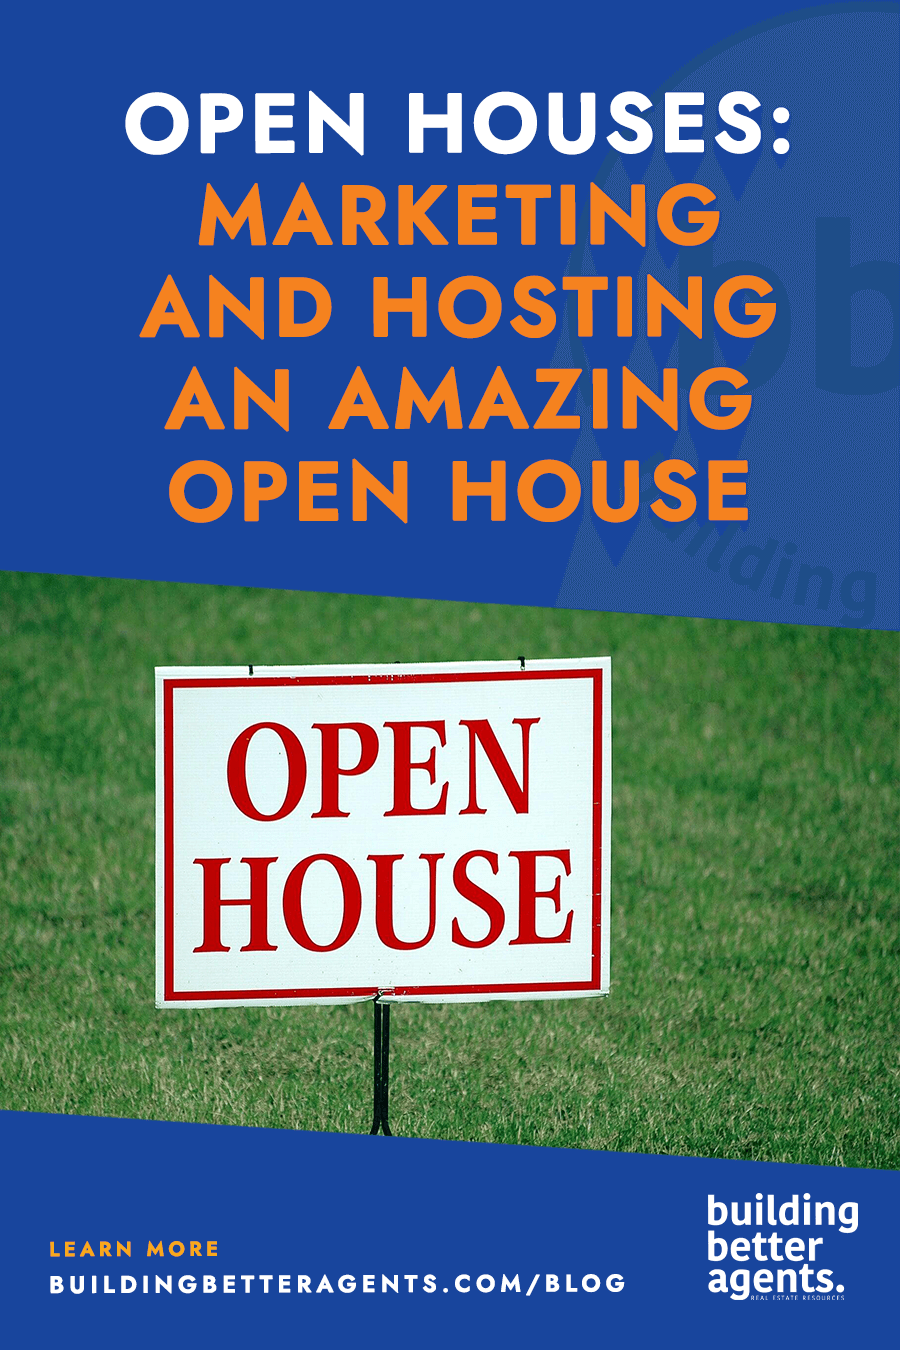 Open Houses: Marketing and Hosting an Amazing Open House